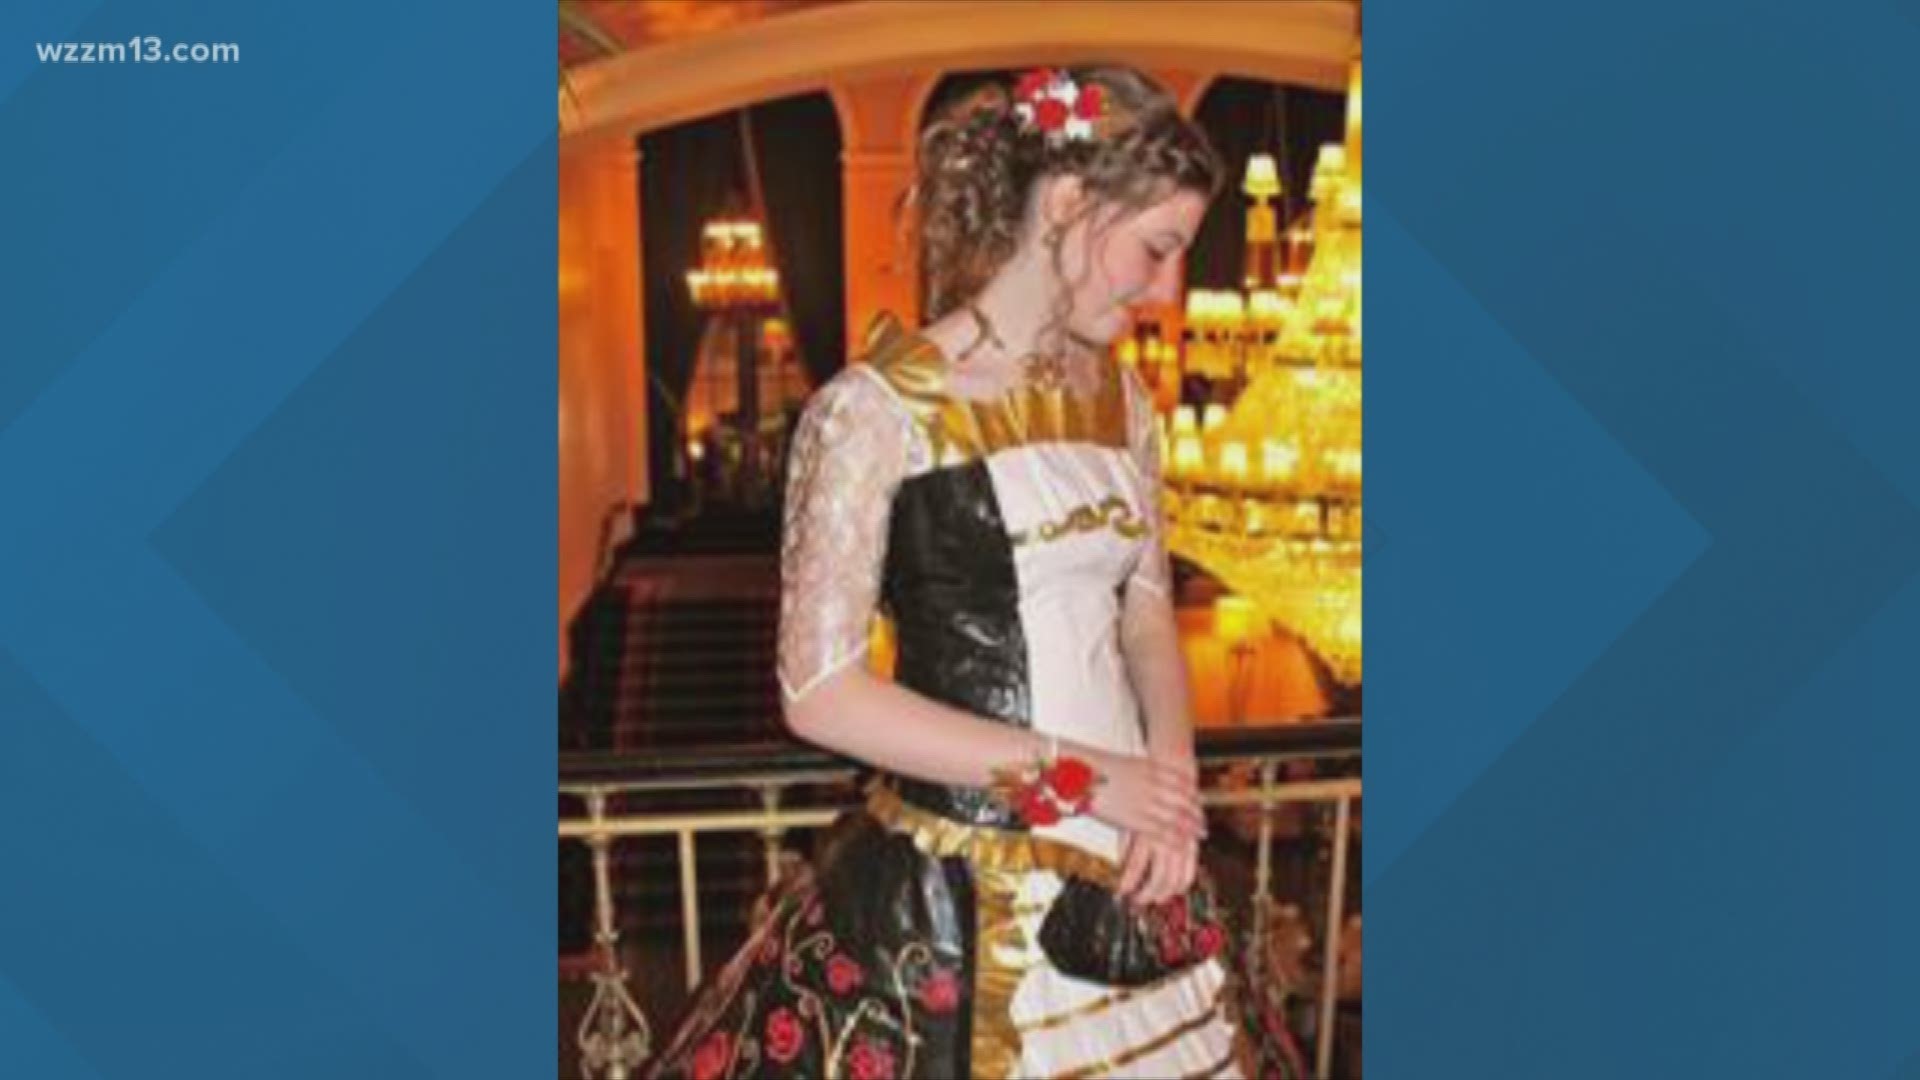 Caledonia teen makes duct tape prom dress that won national competition